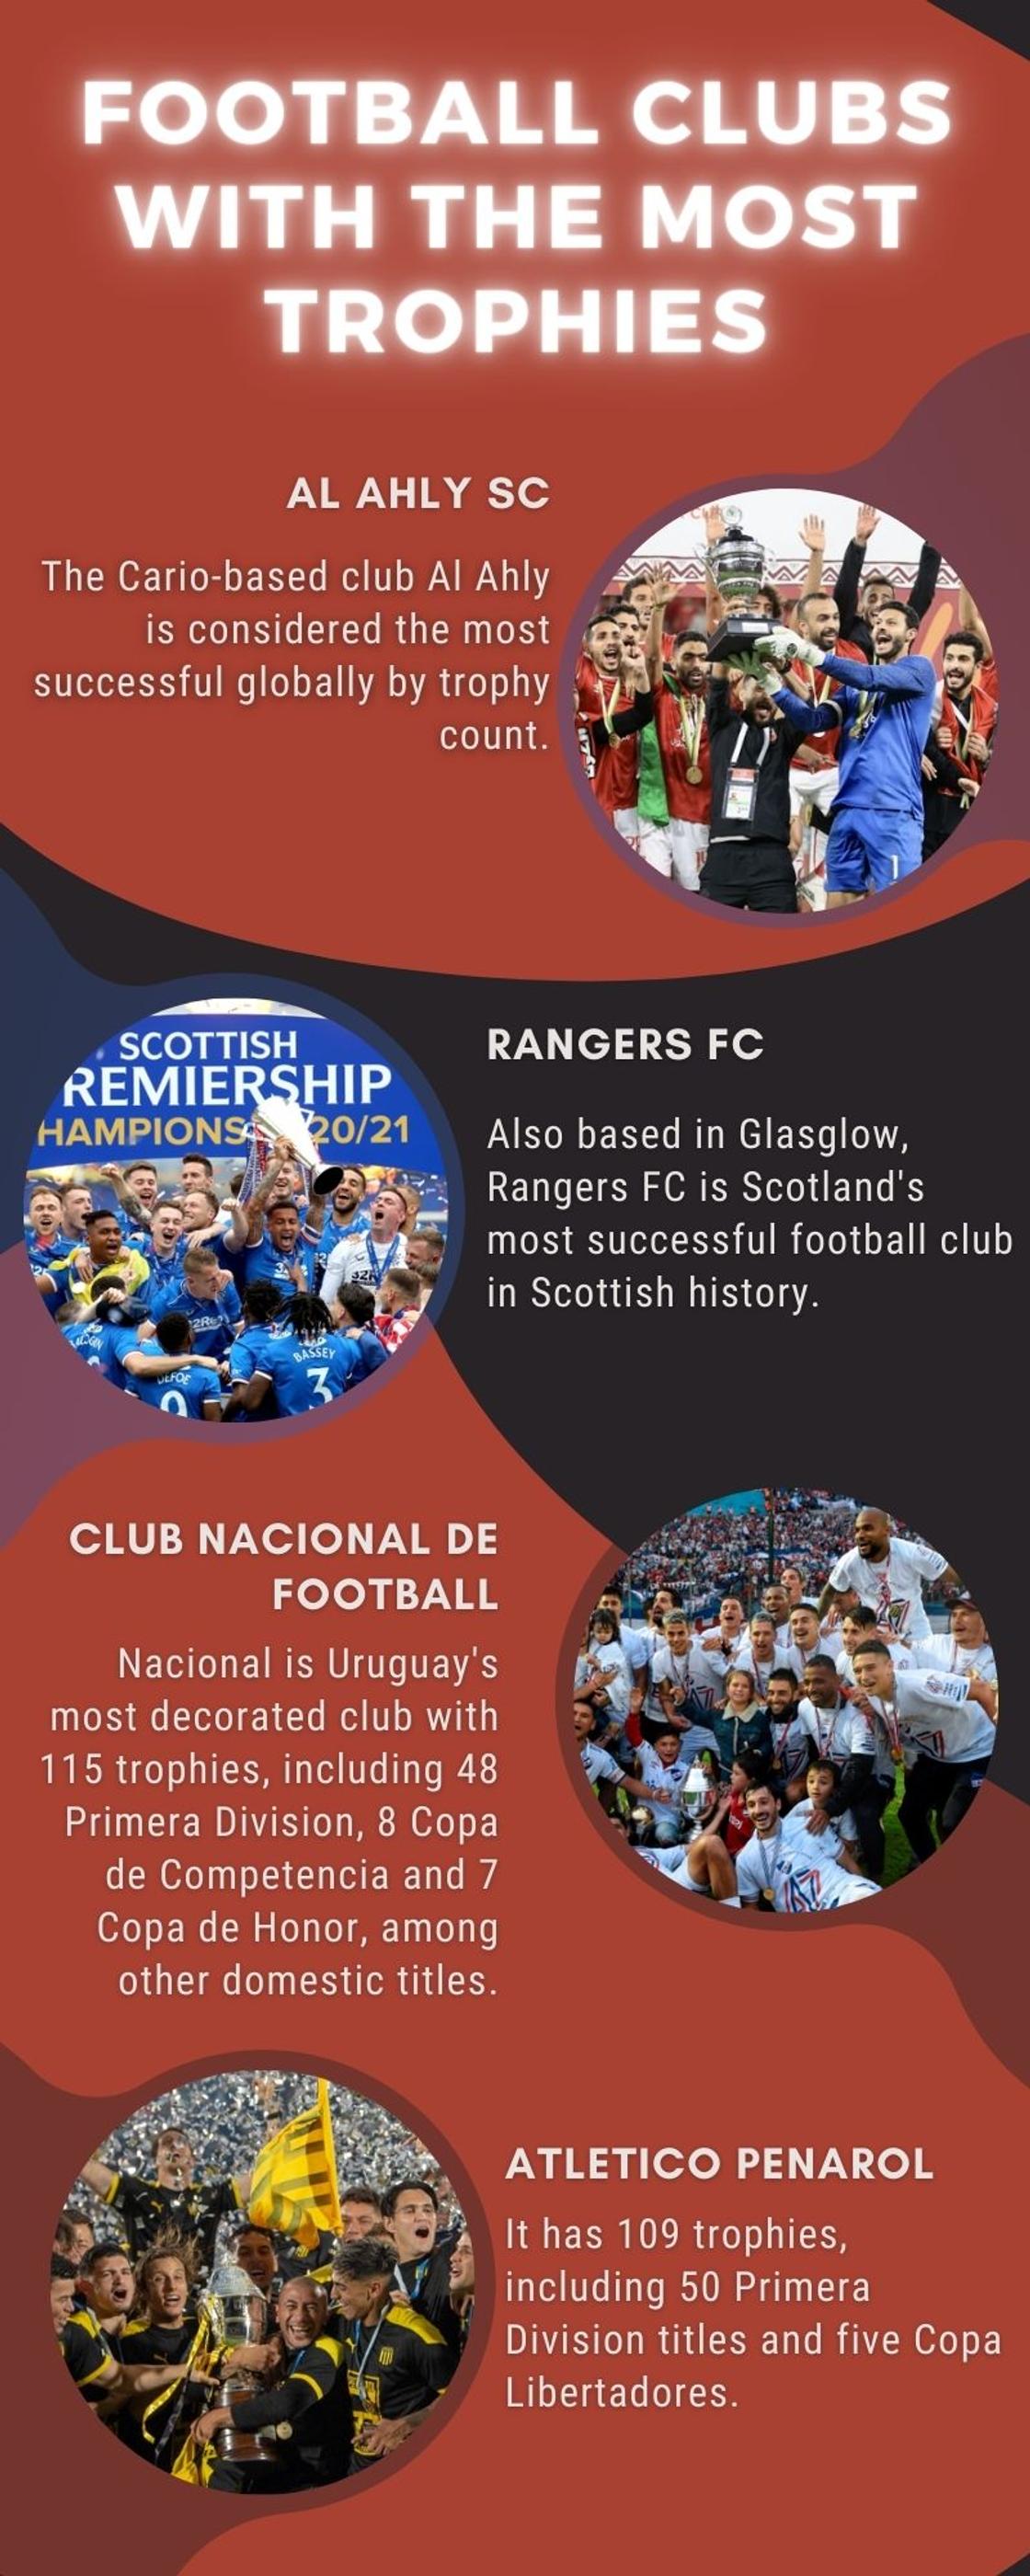 Football clubs with the most trophies